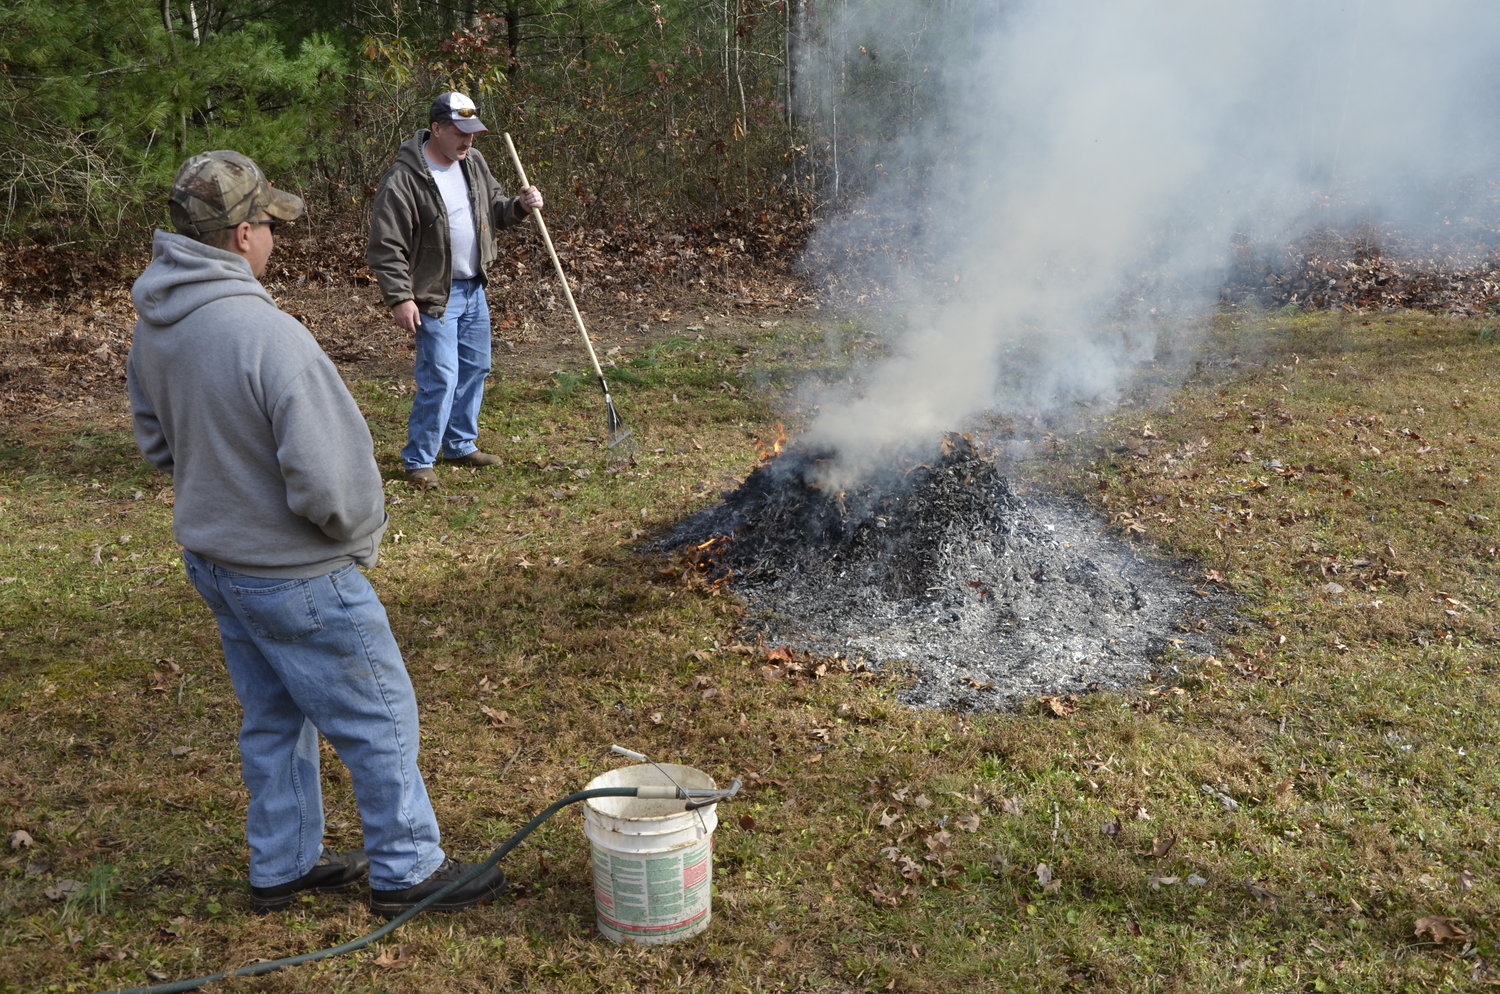 Demonstration of how to conduct a safe debris burn